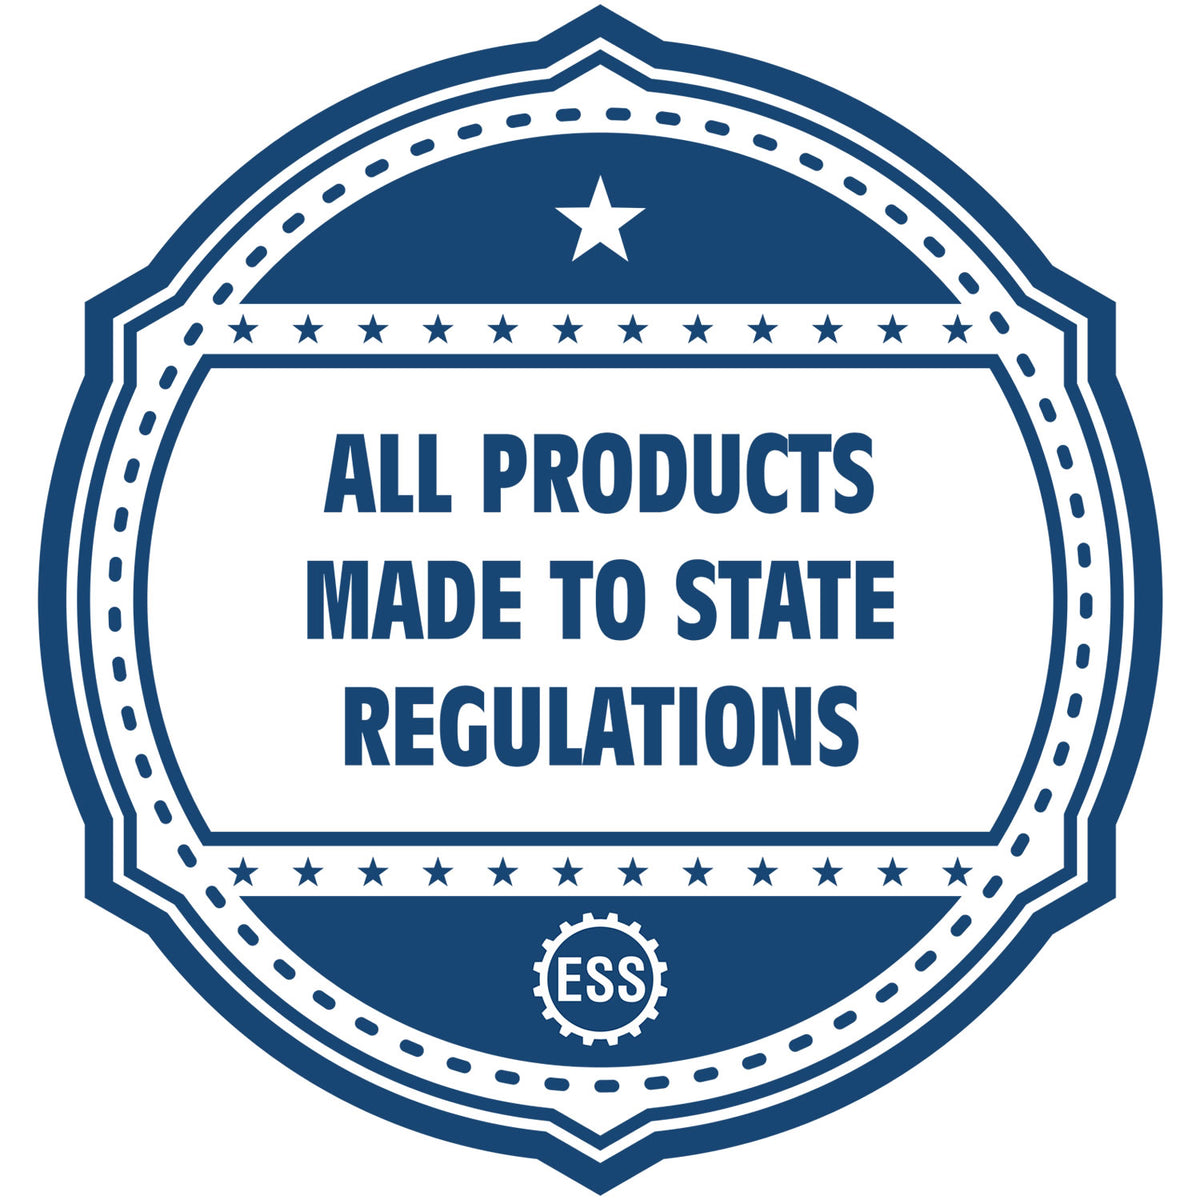 An icon or badge element for the Self-Inking State Seal New Jersey Notary Stamp showing that this product is made in compliance with state regulations.